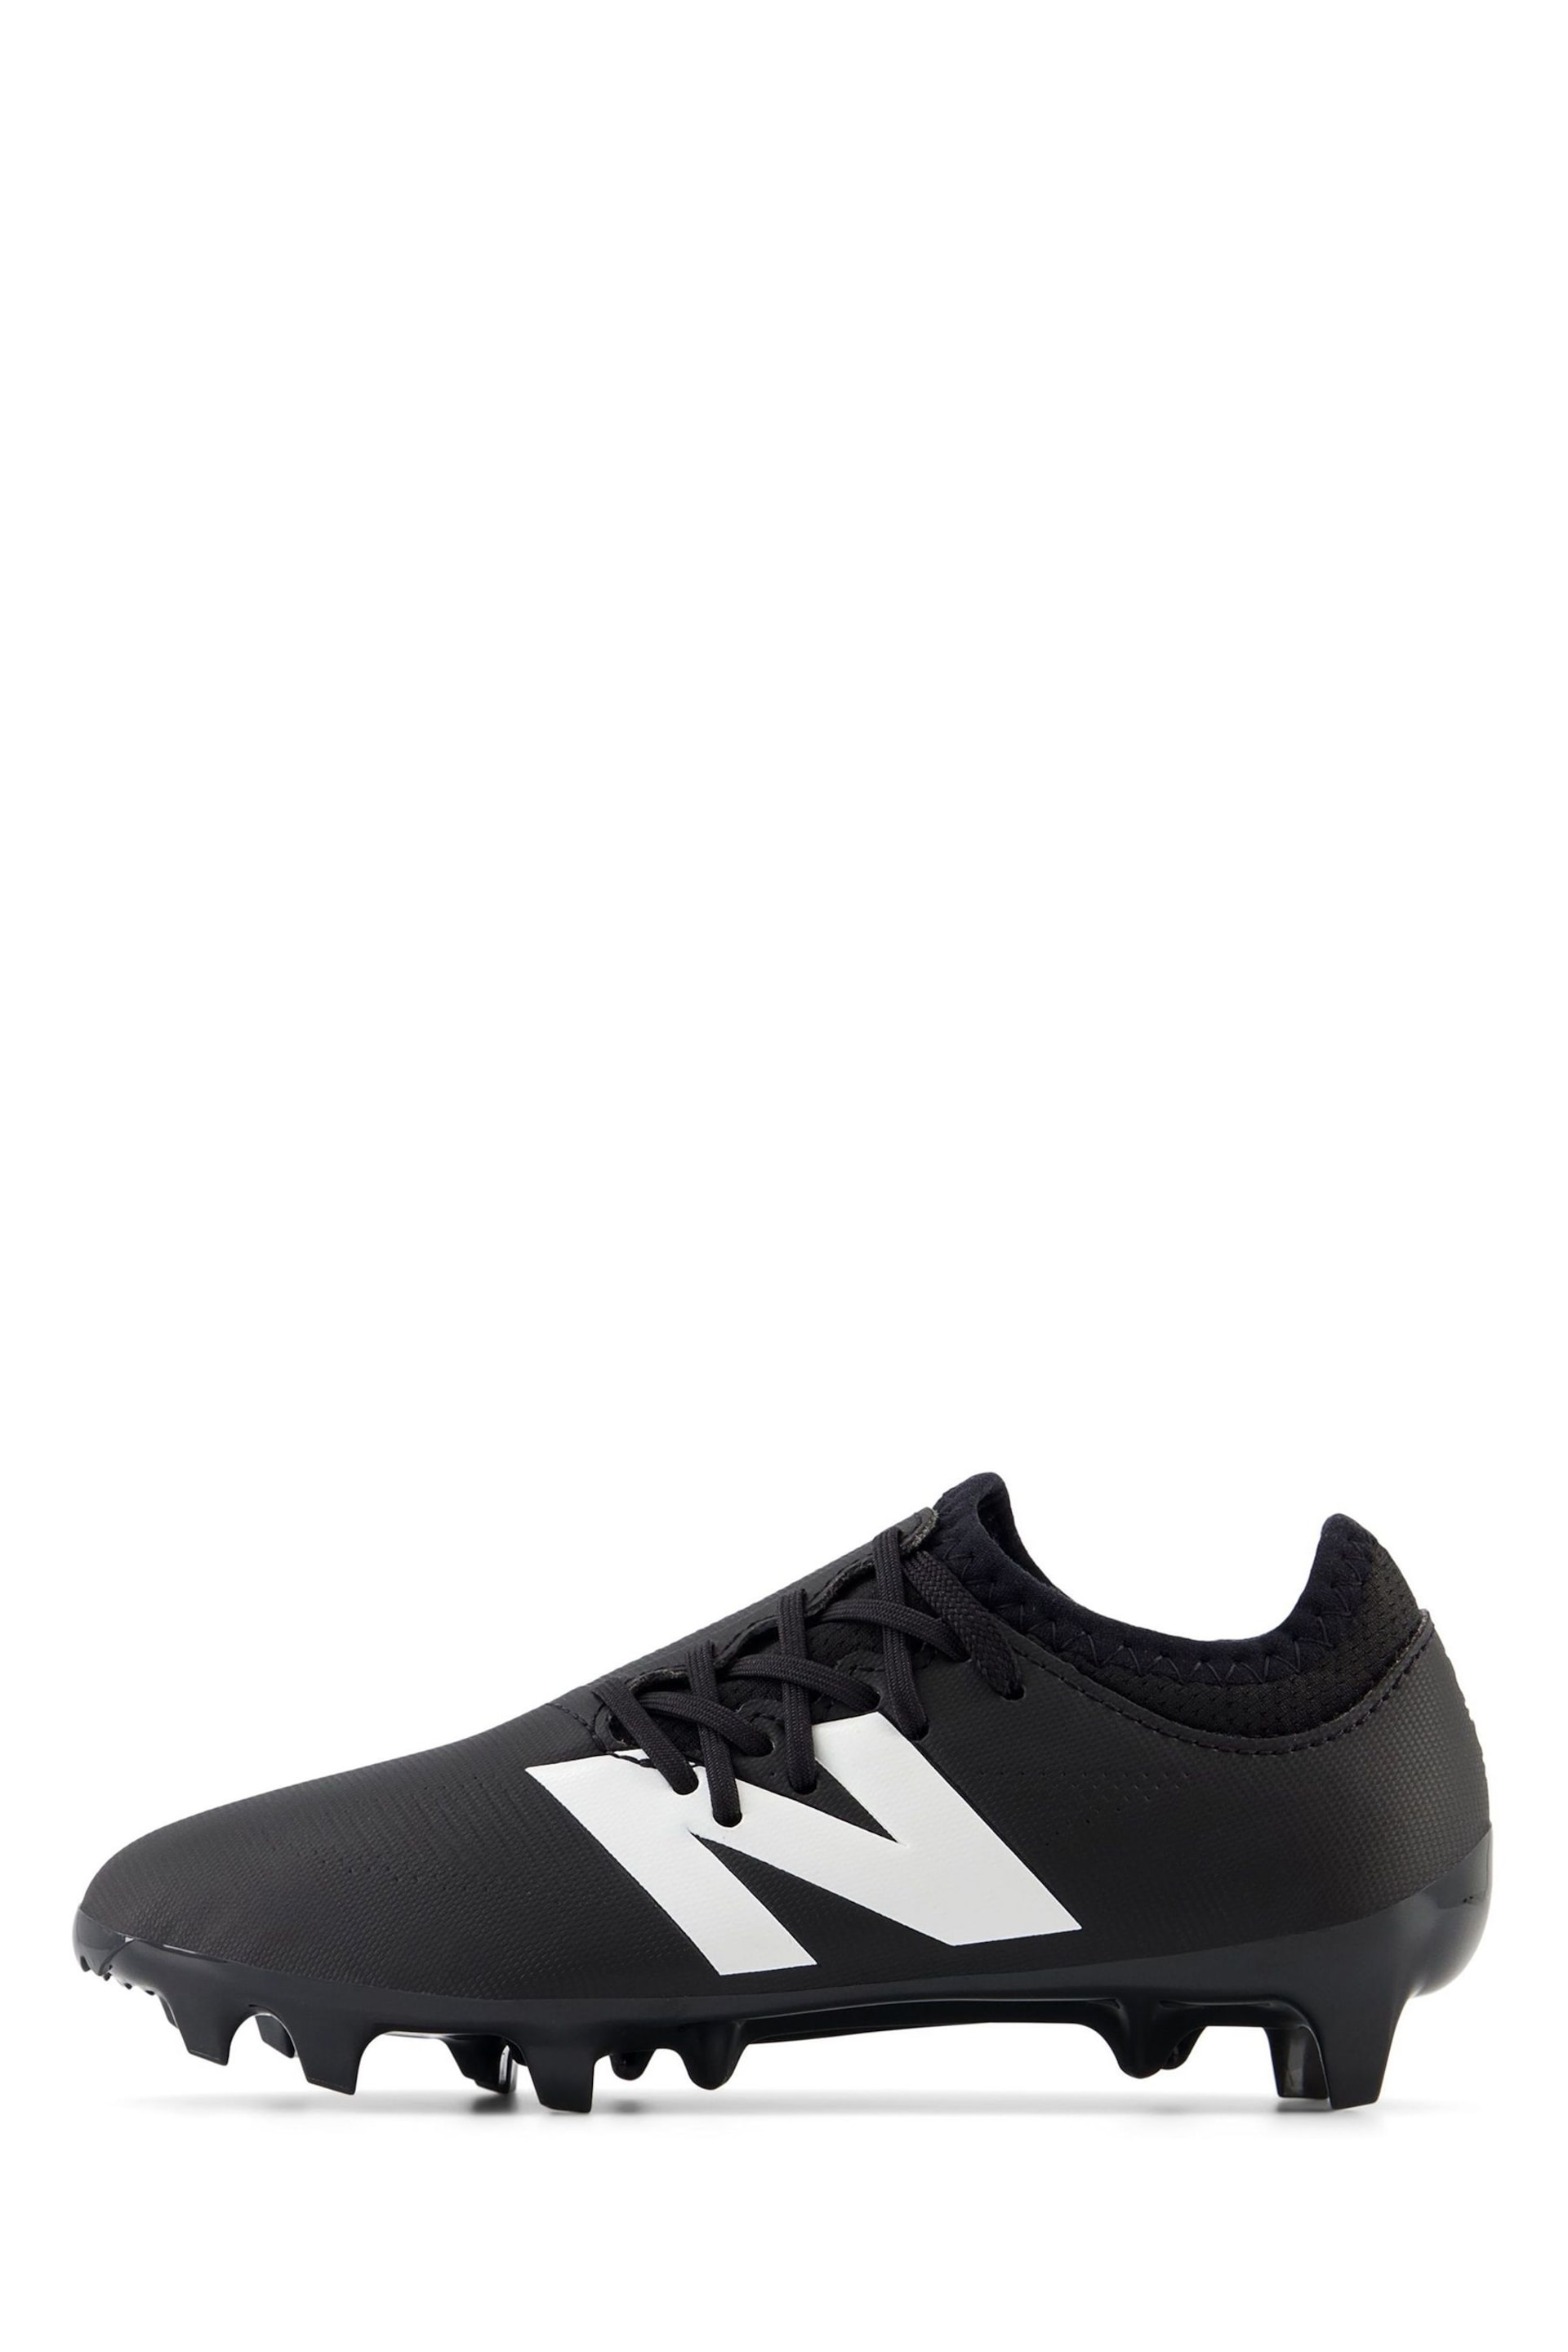 New Balance Black Kids Furon Firm Ground Football Boots - Image 2 of 6